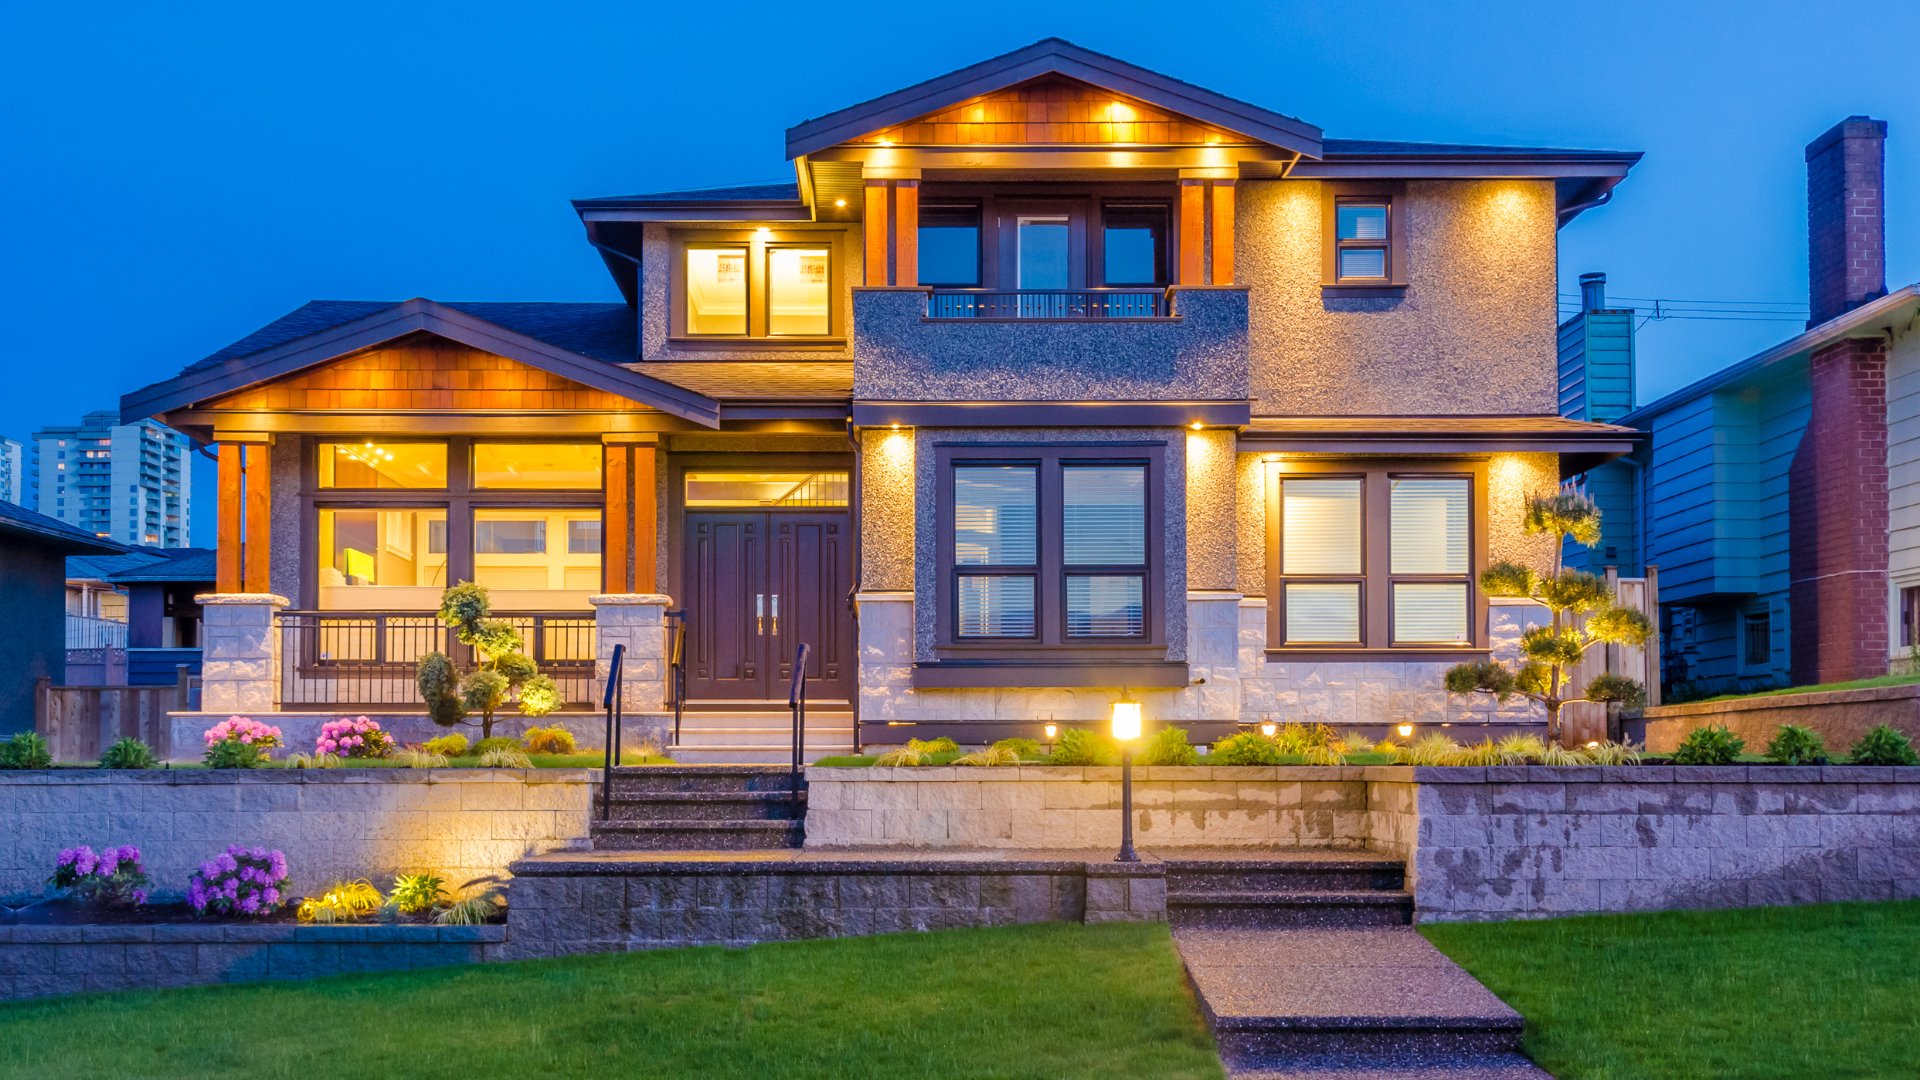 Outdoor Lighting Can Enhance the Beauty & Safety of Your Property at Night